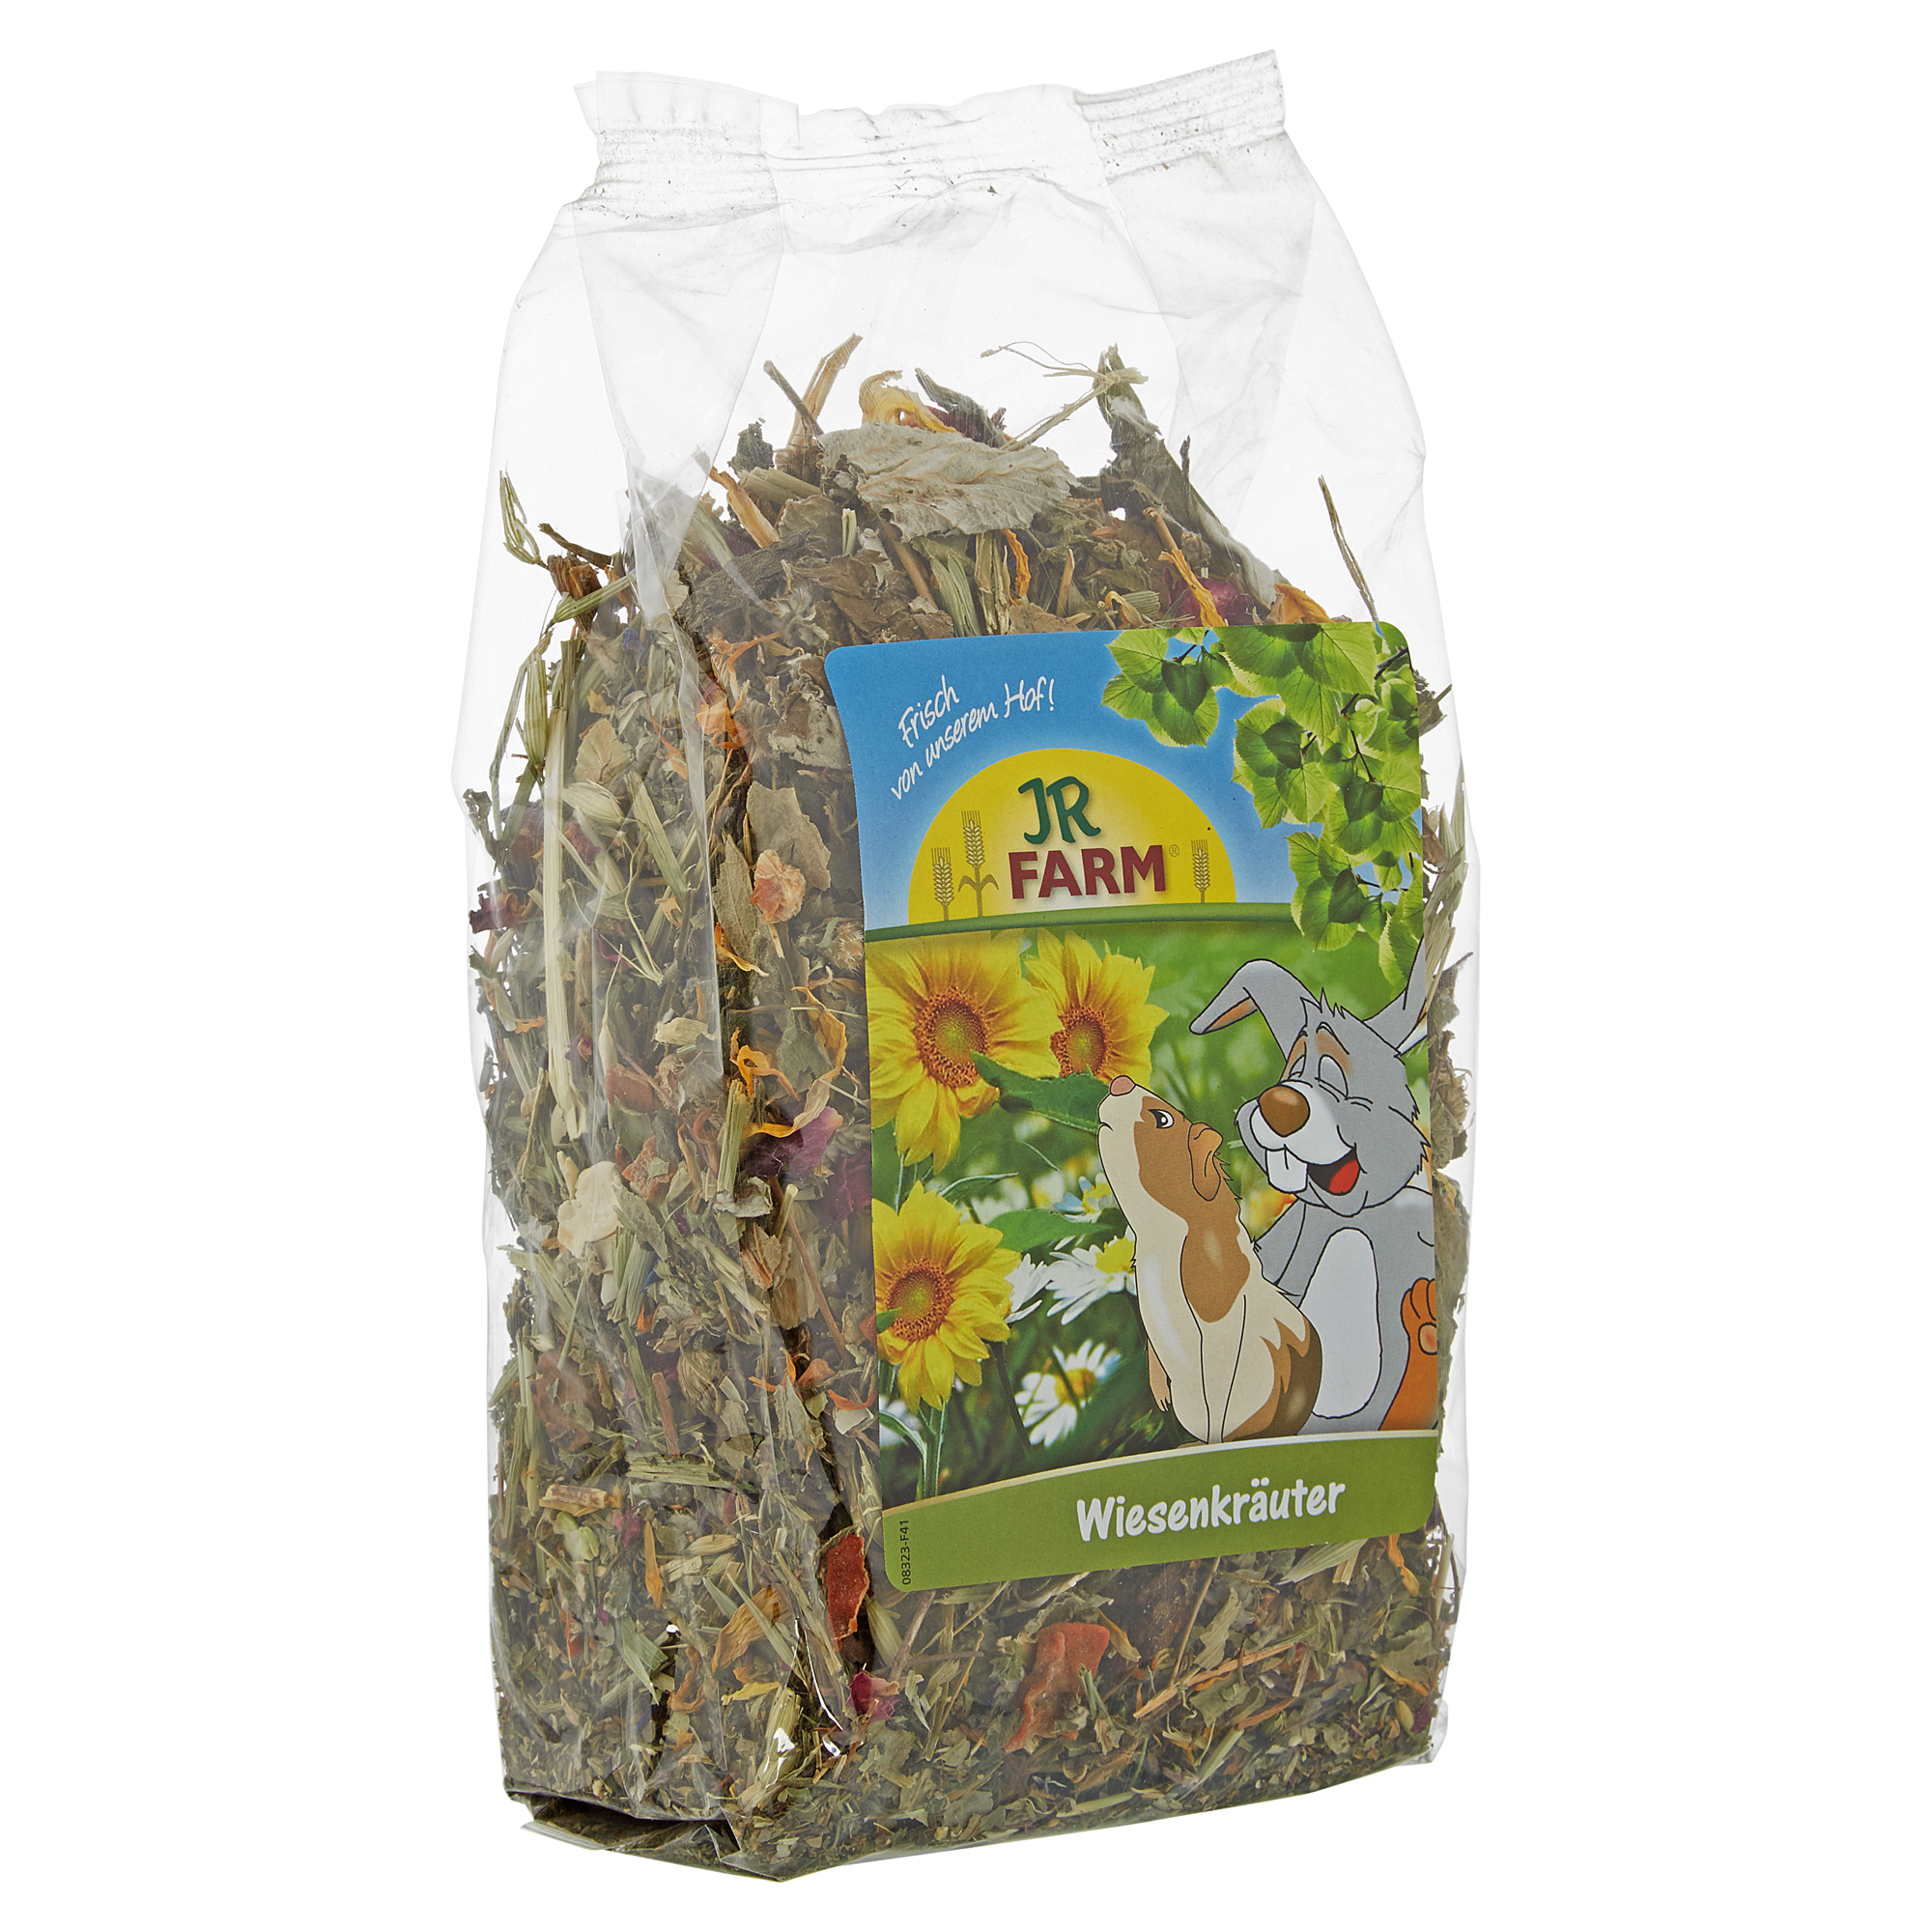 Nagersnack Wiesenkräuter 150 g + product picture